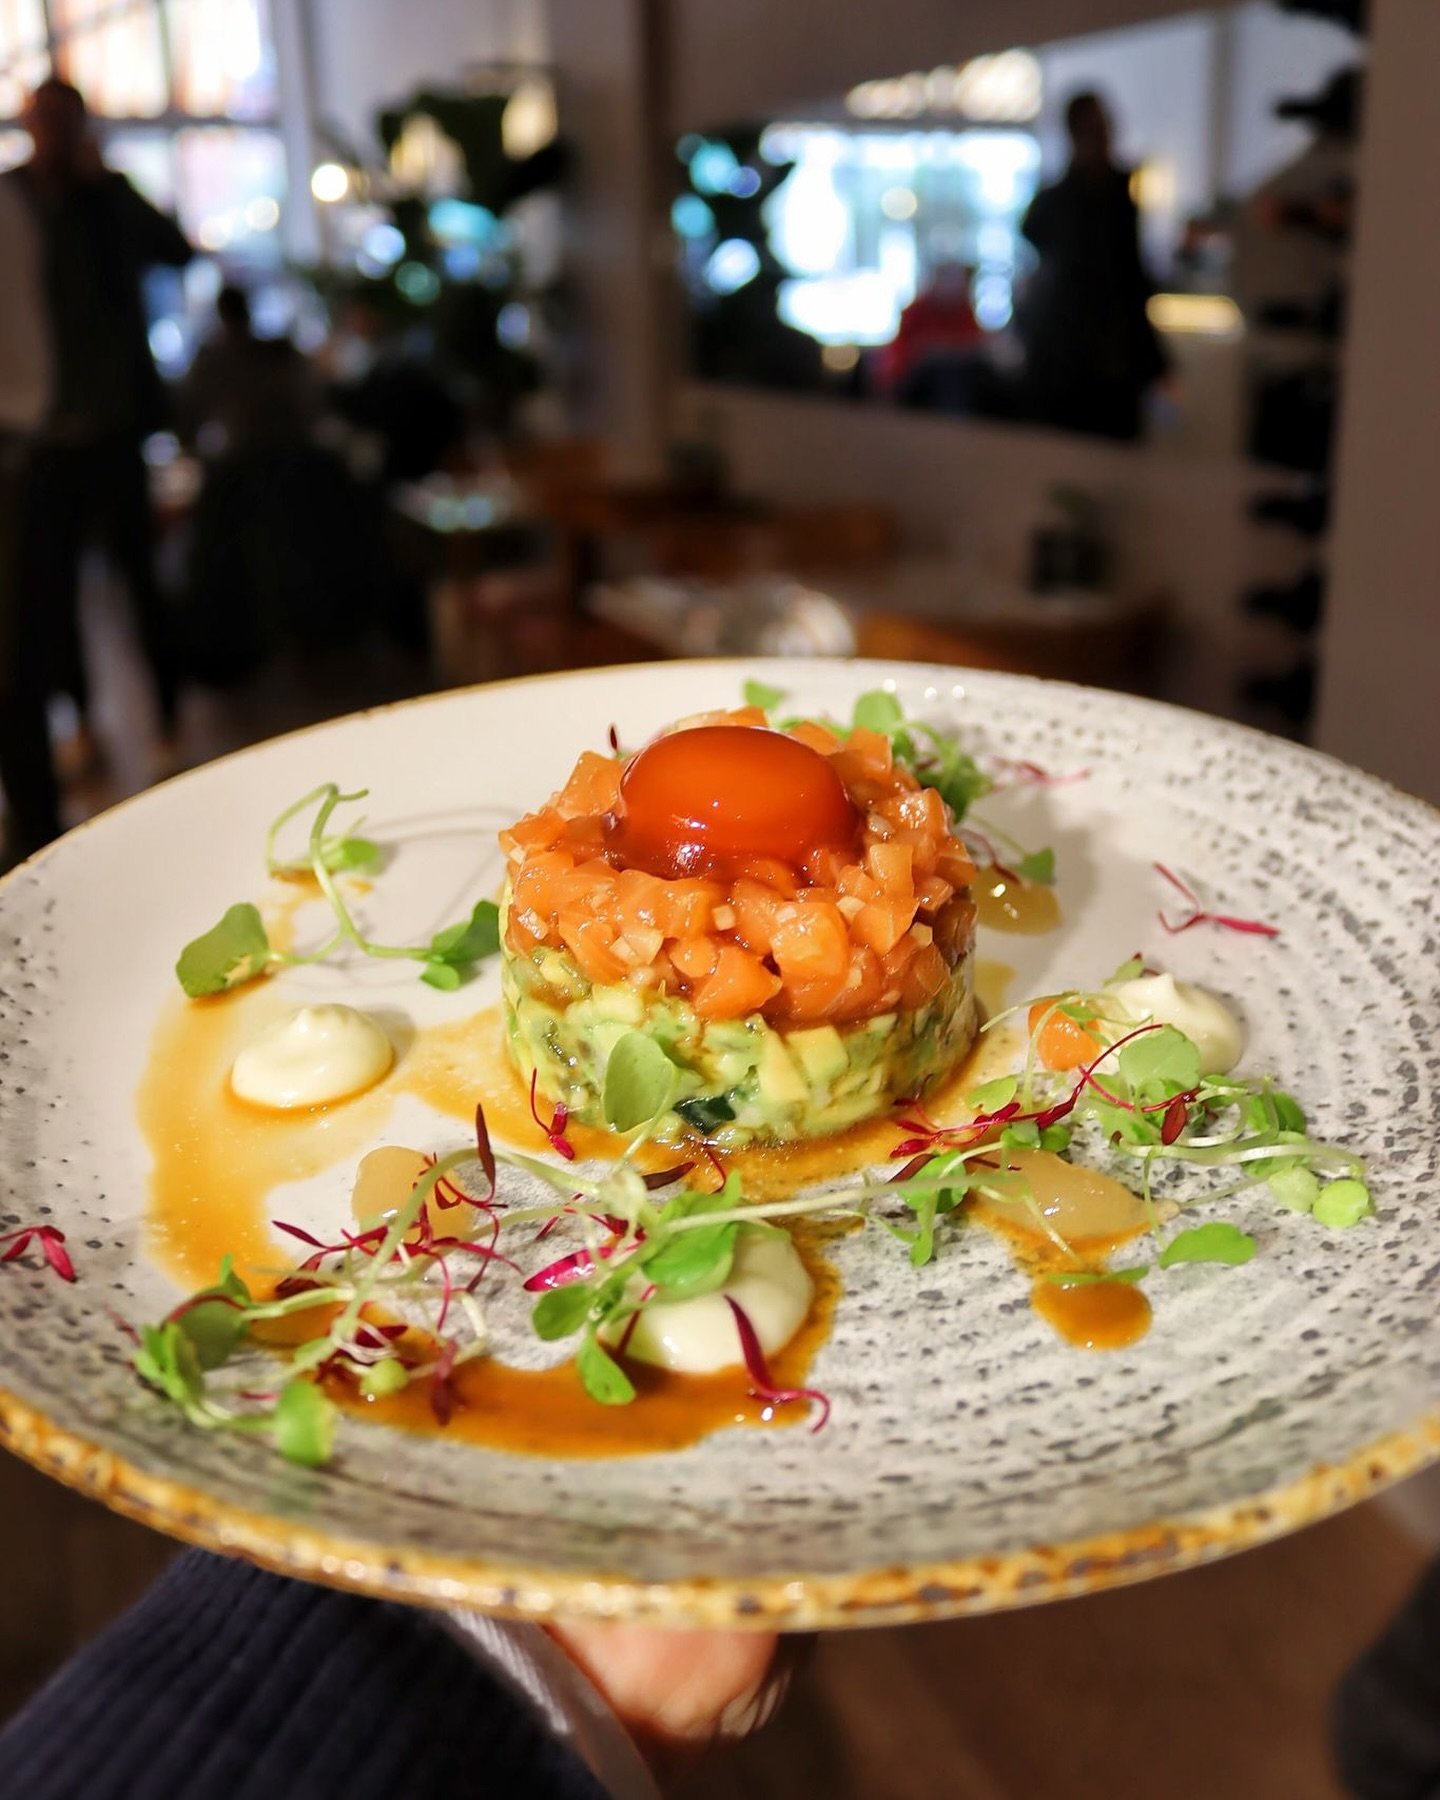 Embracing our Aussie roots with our fresh and vibrant lunch dishes, such as this Salmon tartare with avocado, cured egg &amp; ponzu gel.
.
.
.
.
#EnglandsGrace #healthyeating #autralia #australianfood #londonrestaurants #londonfood #foodblogger #lunc